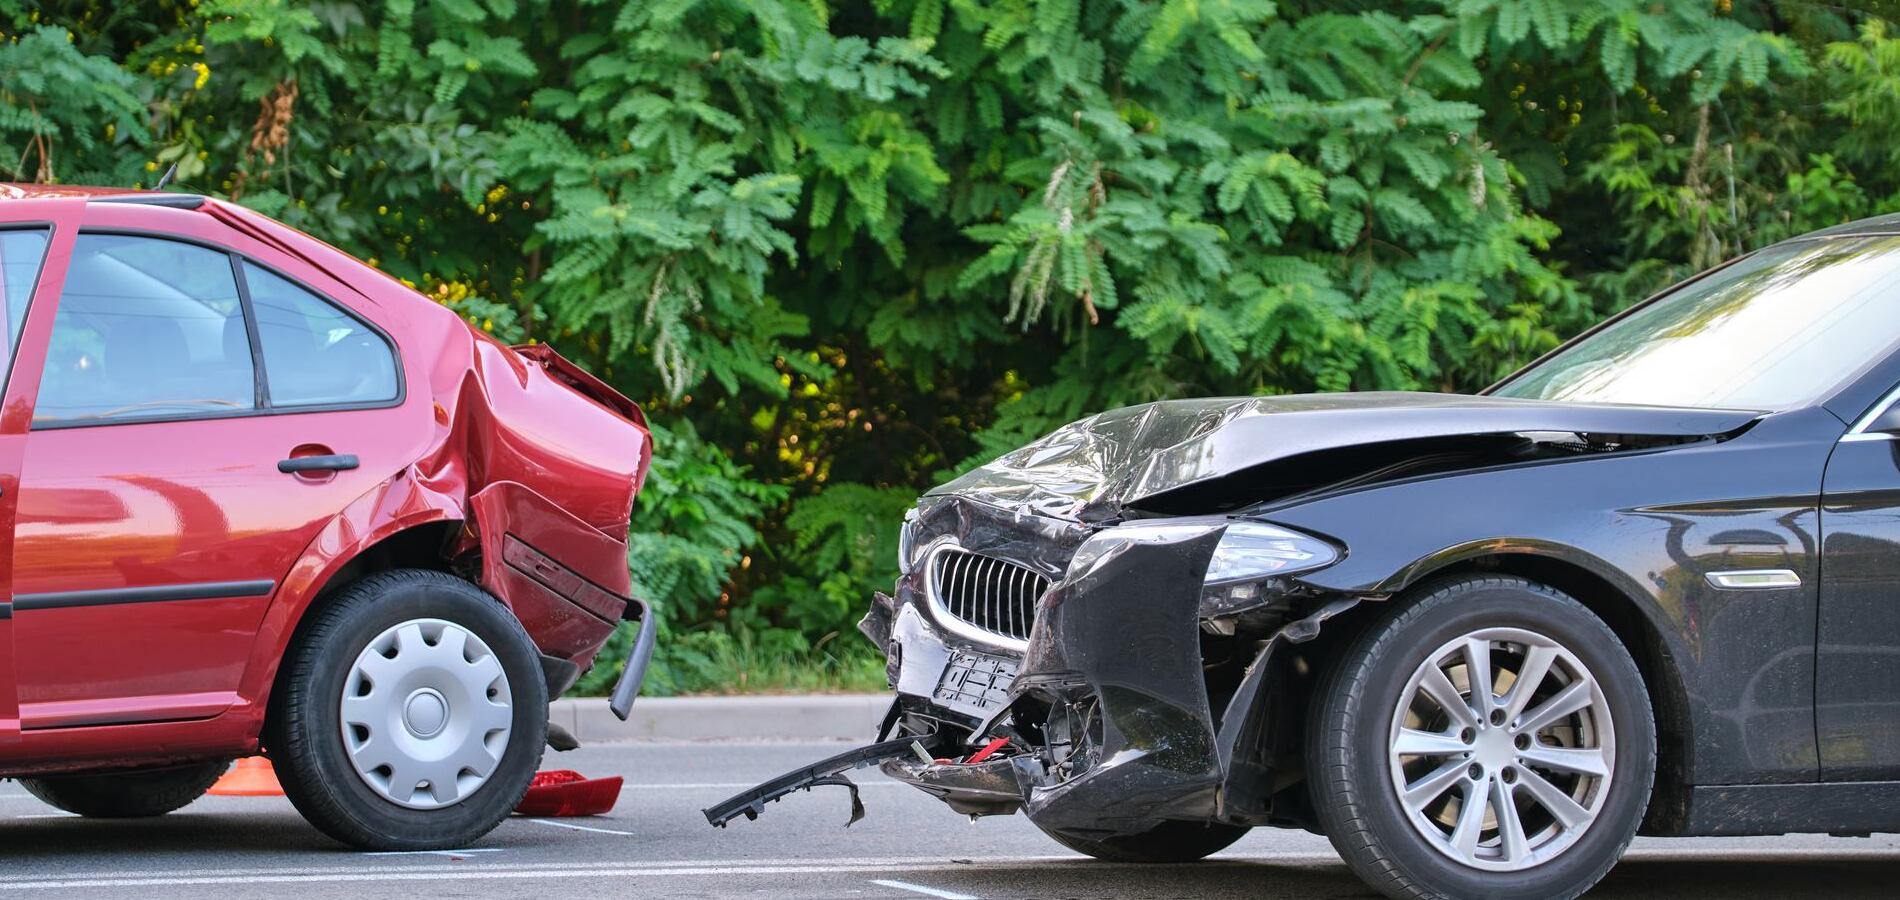 Car Accident Lawyer in Buena Park, CA